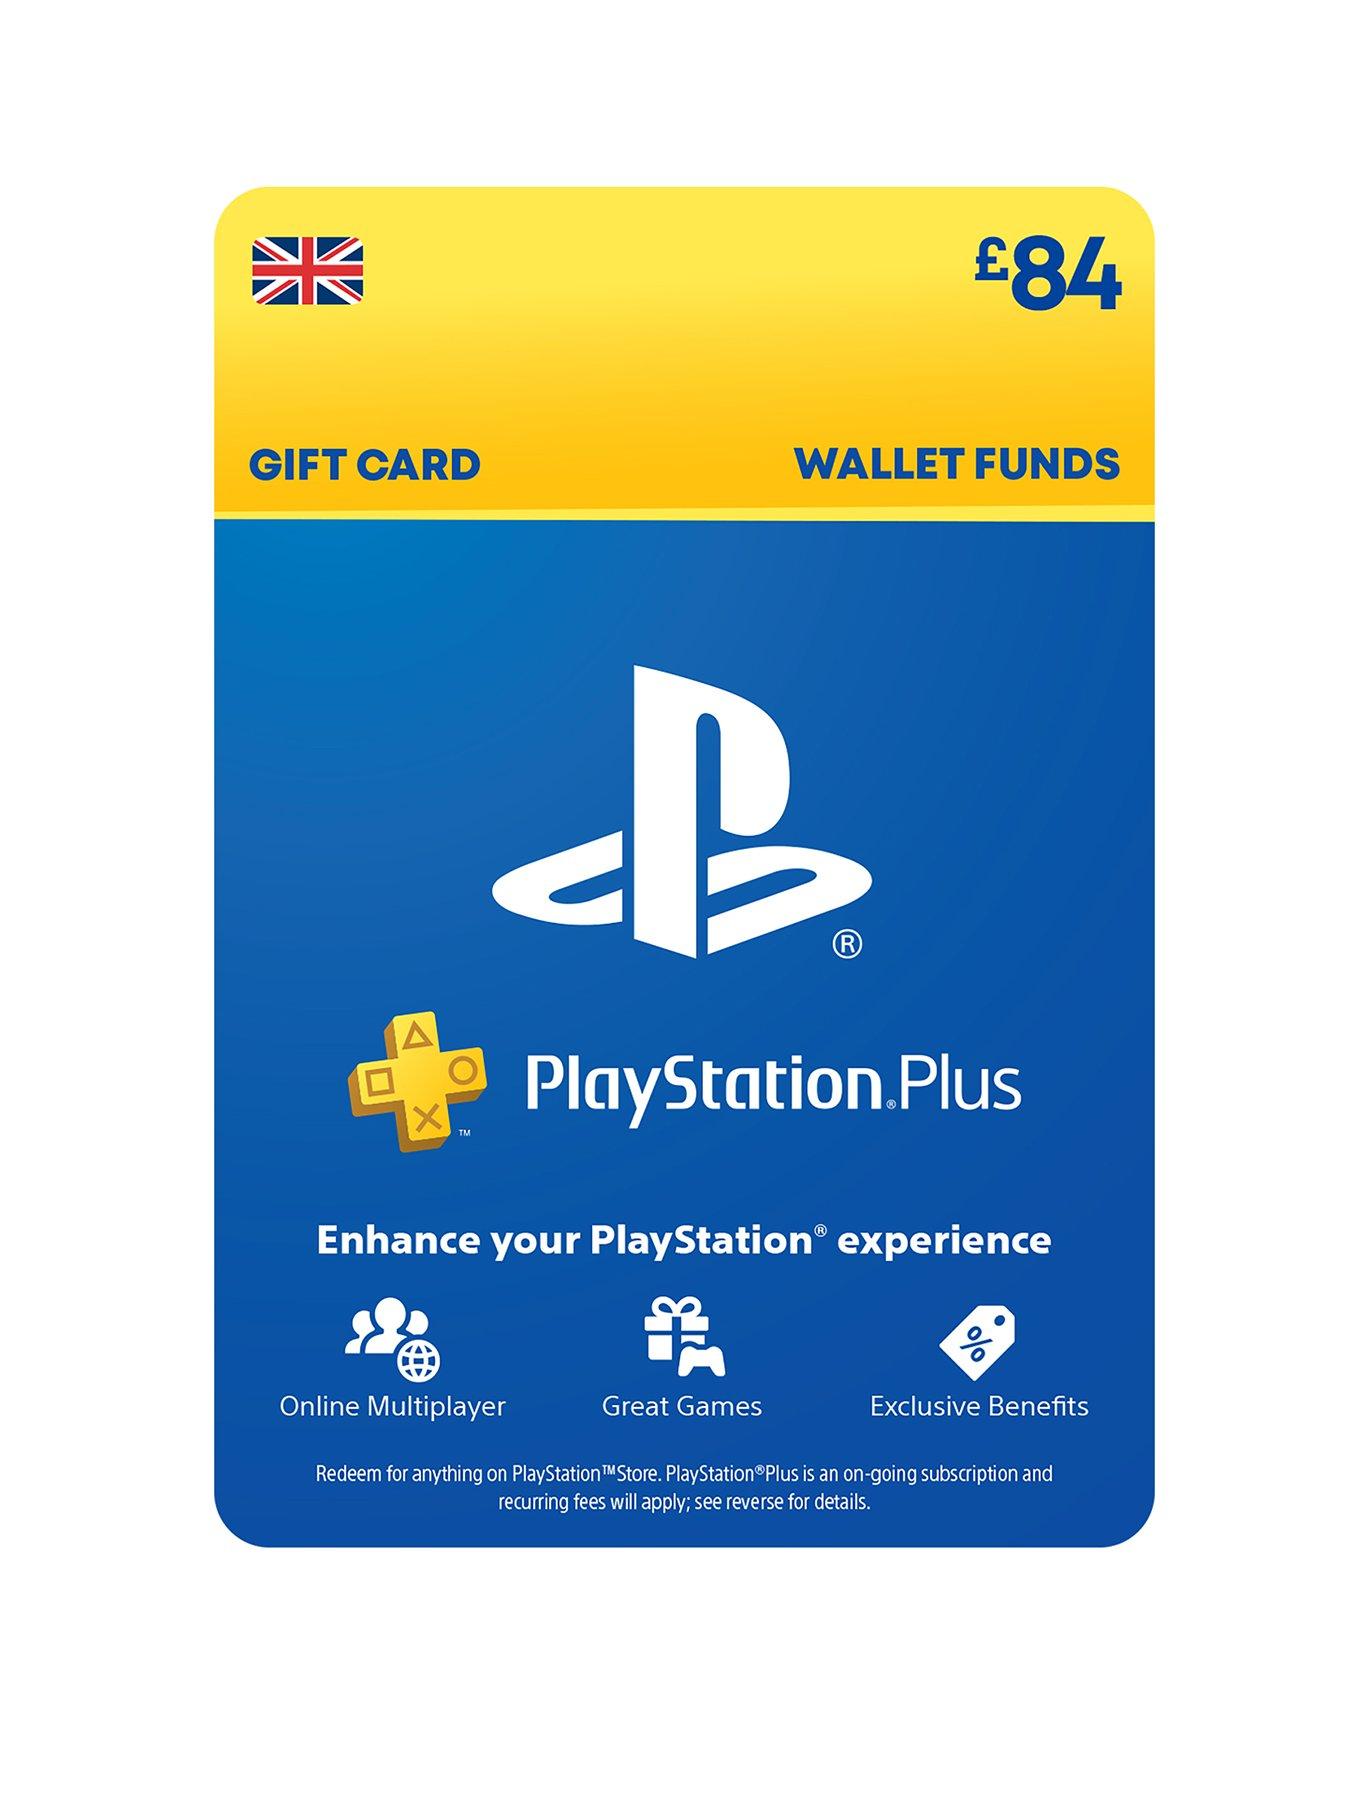 Playstation Store Network PSN UK £5 GB Pounds Gift Card